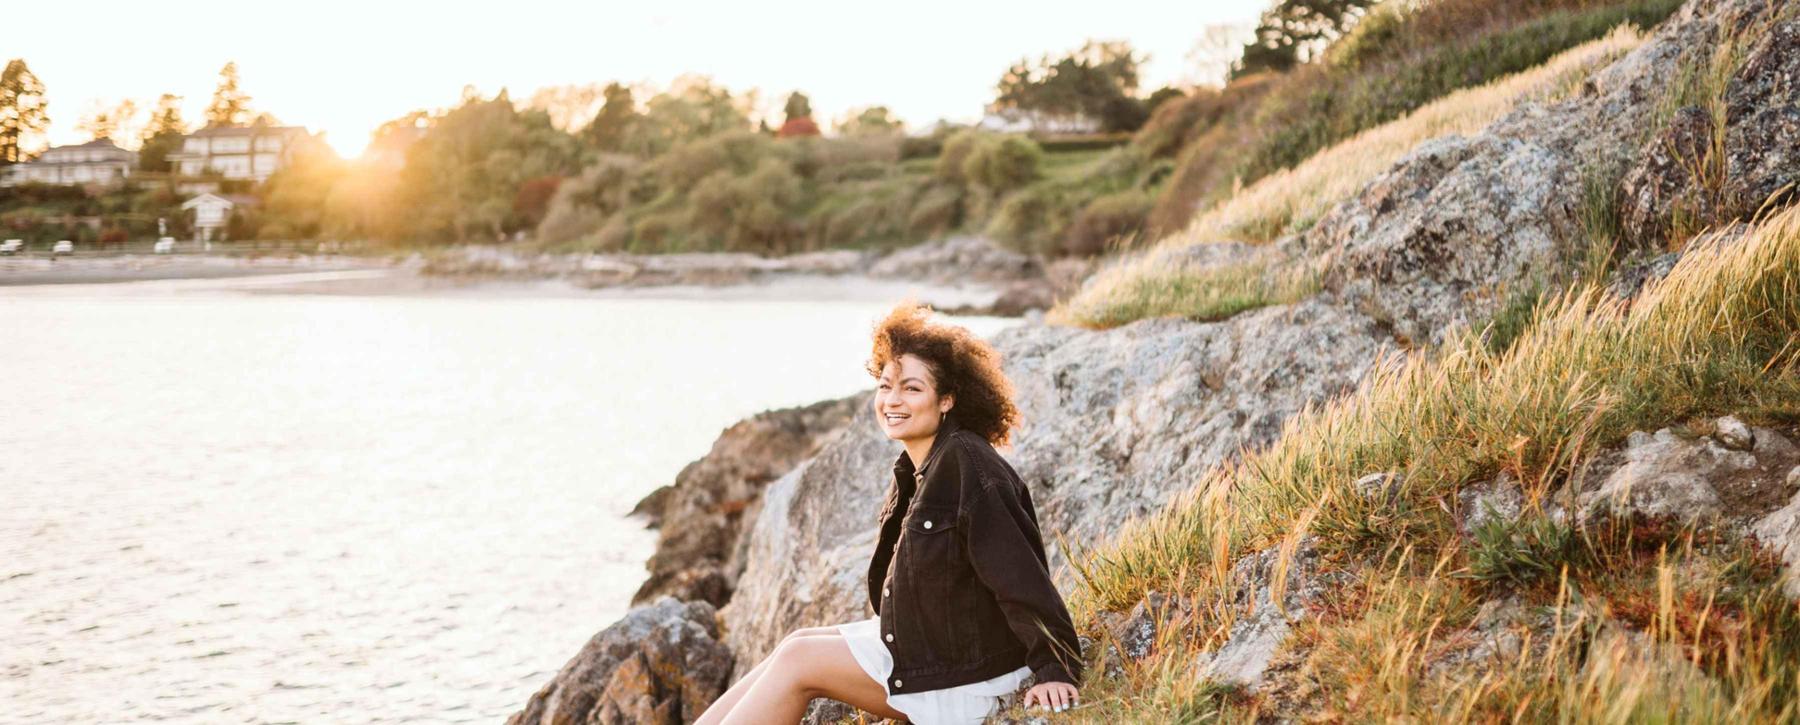 A woman with curly hair sits on rocks by the ocean smiling at the camera while the sunsets behind her.